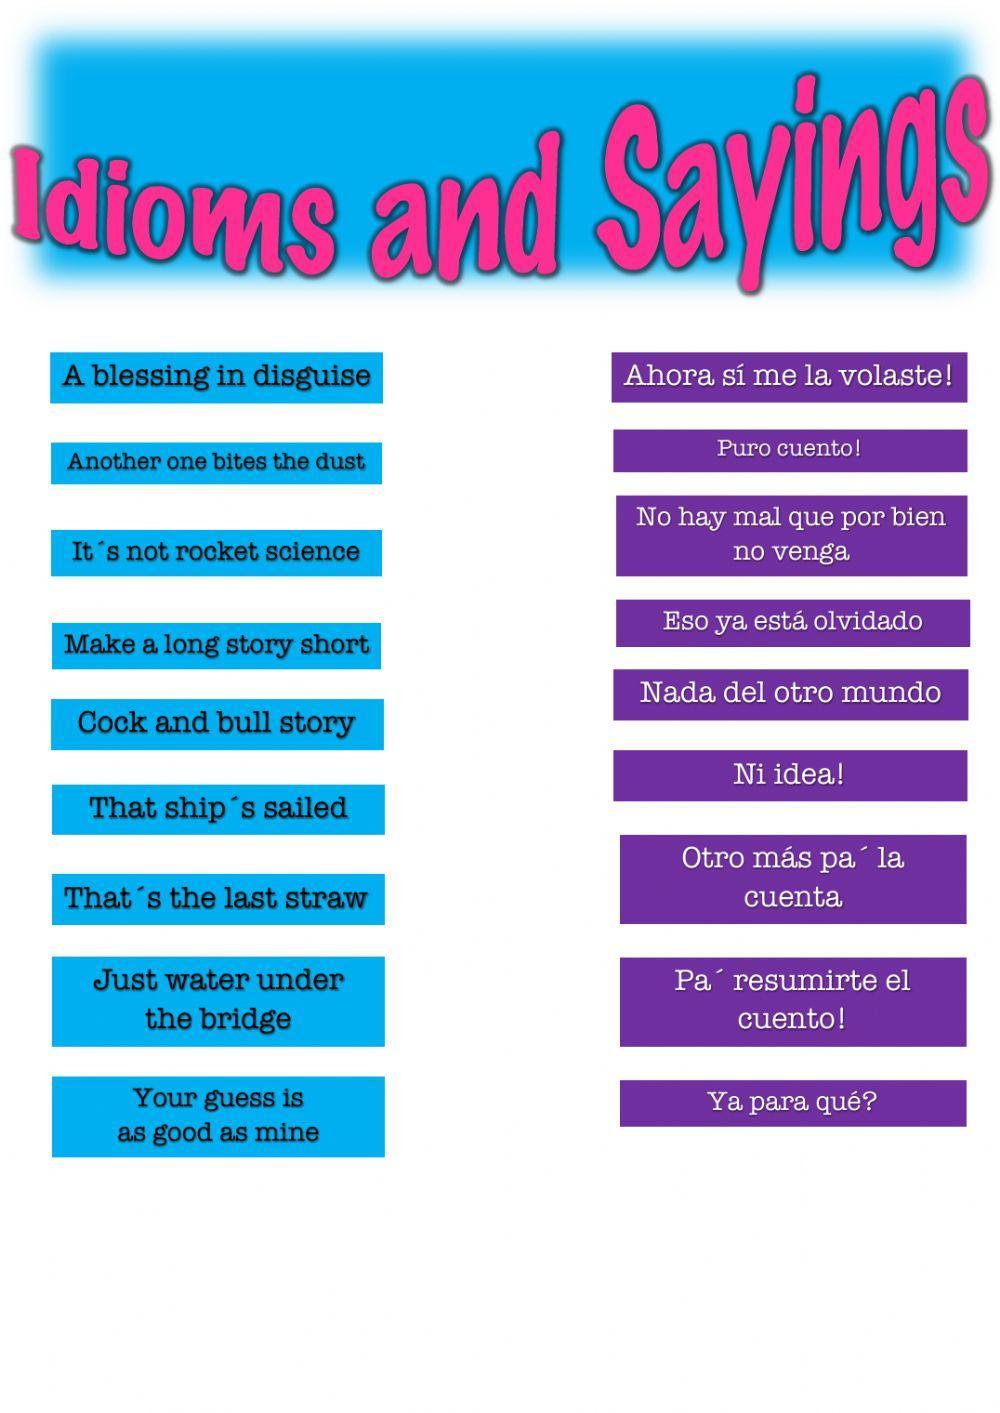 Idioms and Sayings